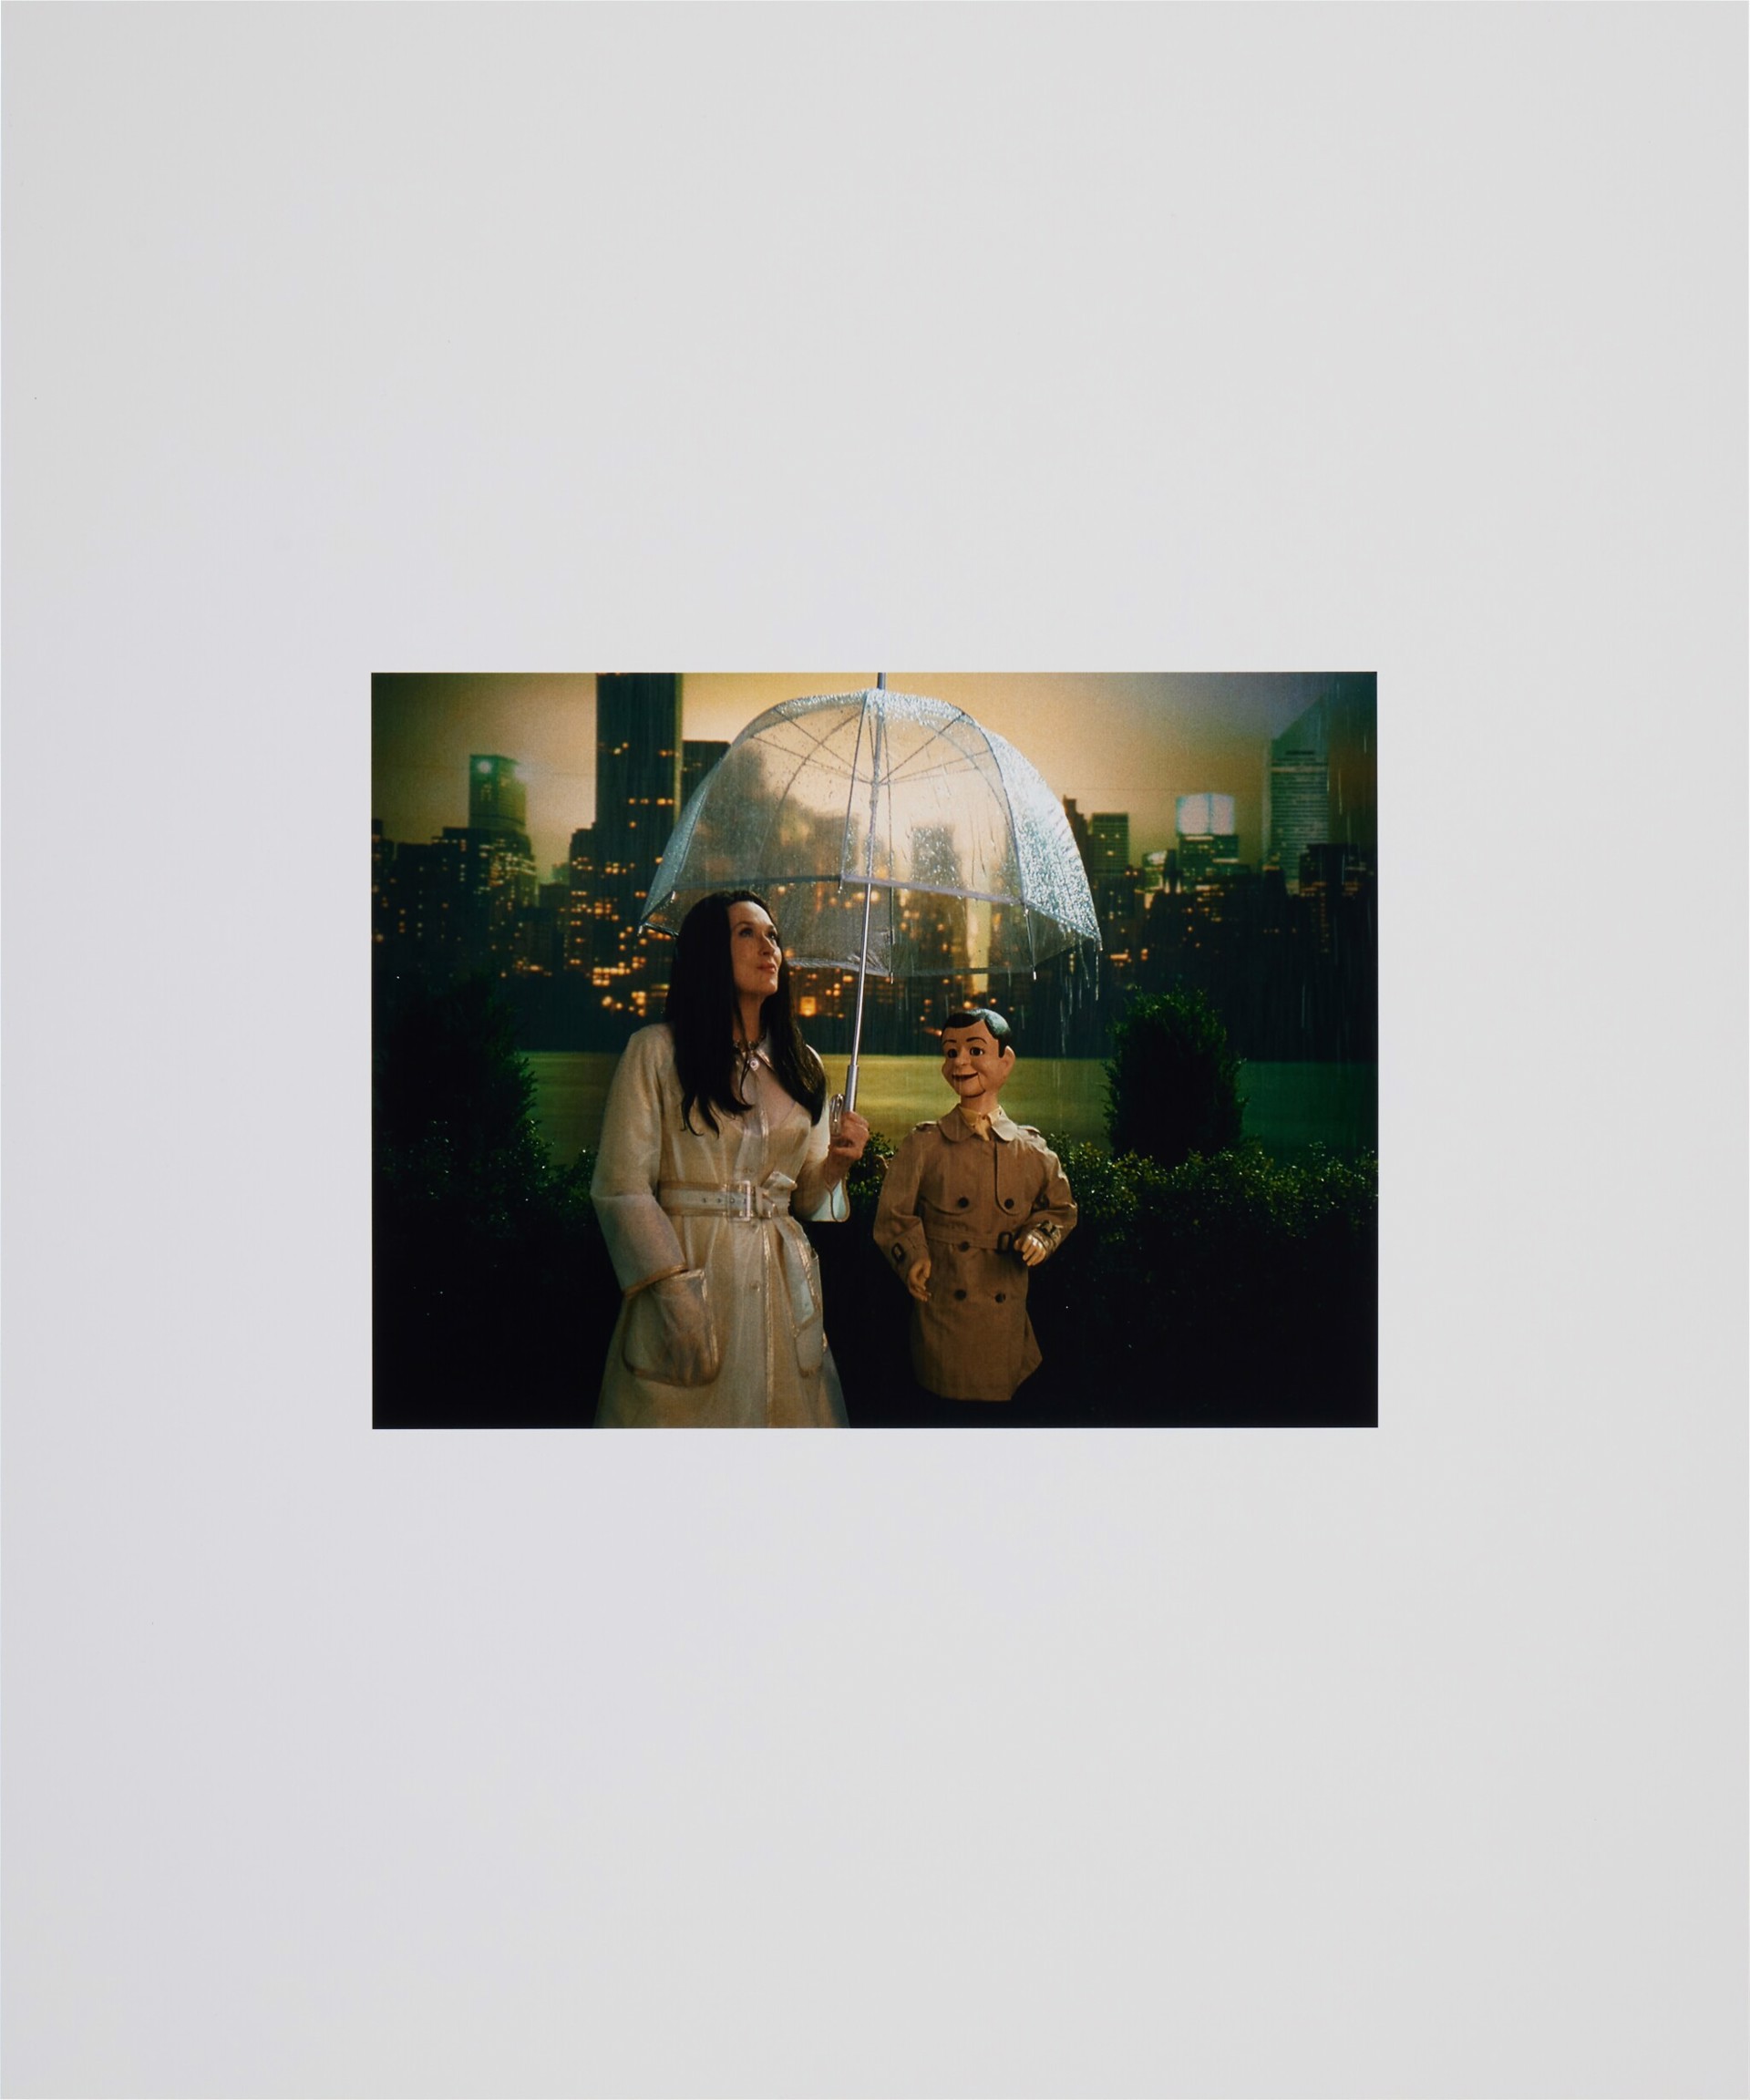 The Music of Regret (Meryl, Act 2, Rain) (from America: Now + Here portfolio) by Laurie Simmons